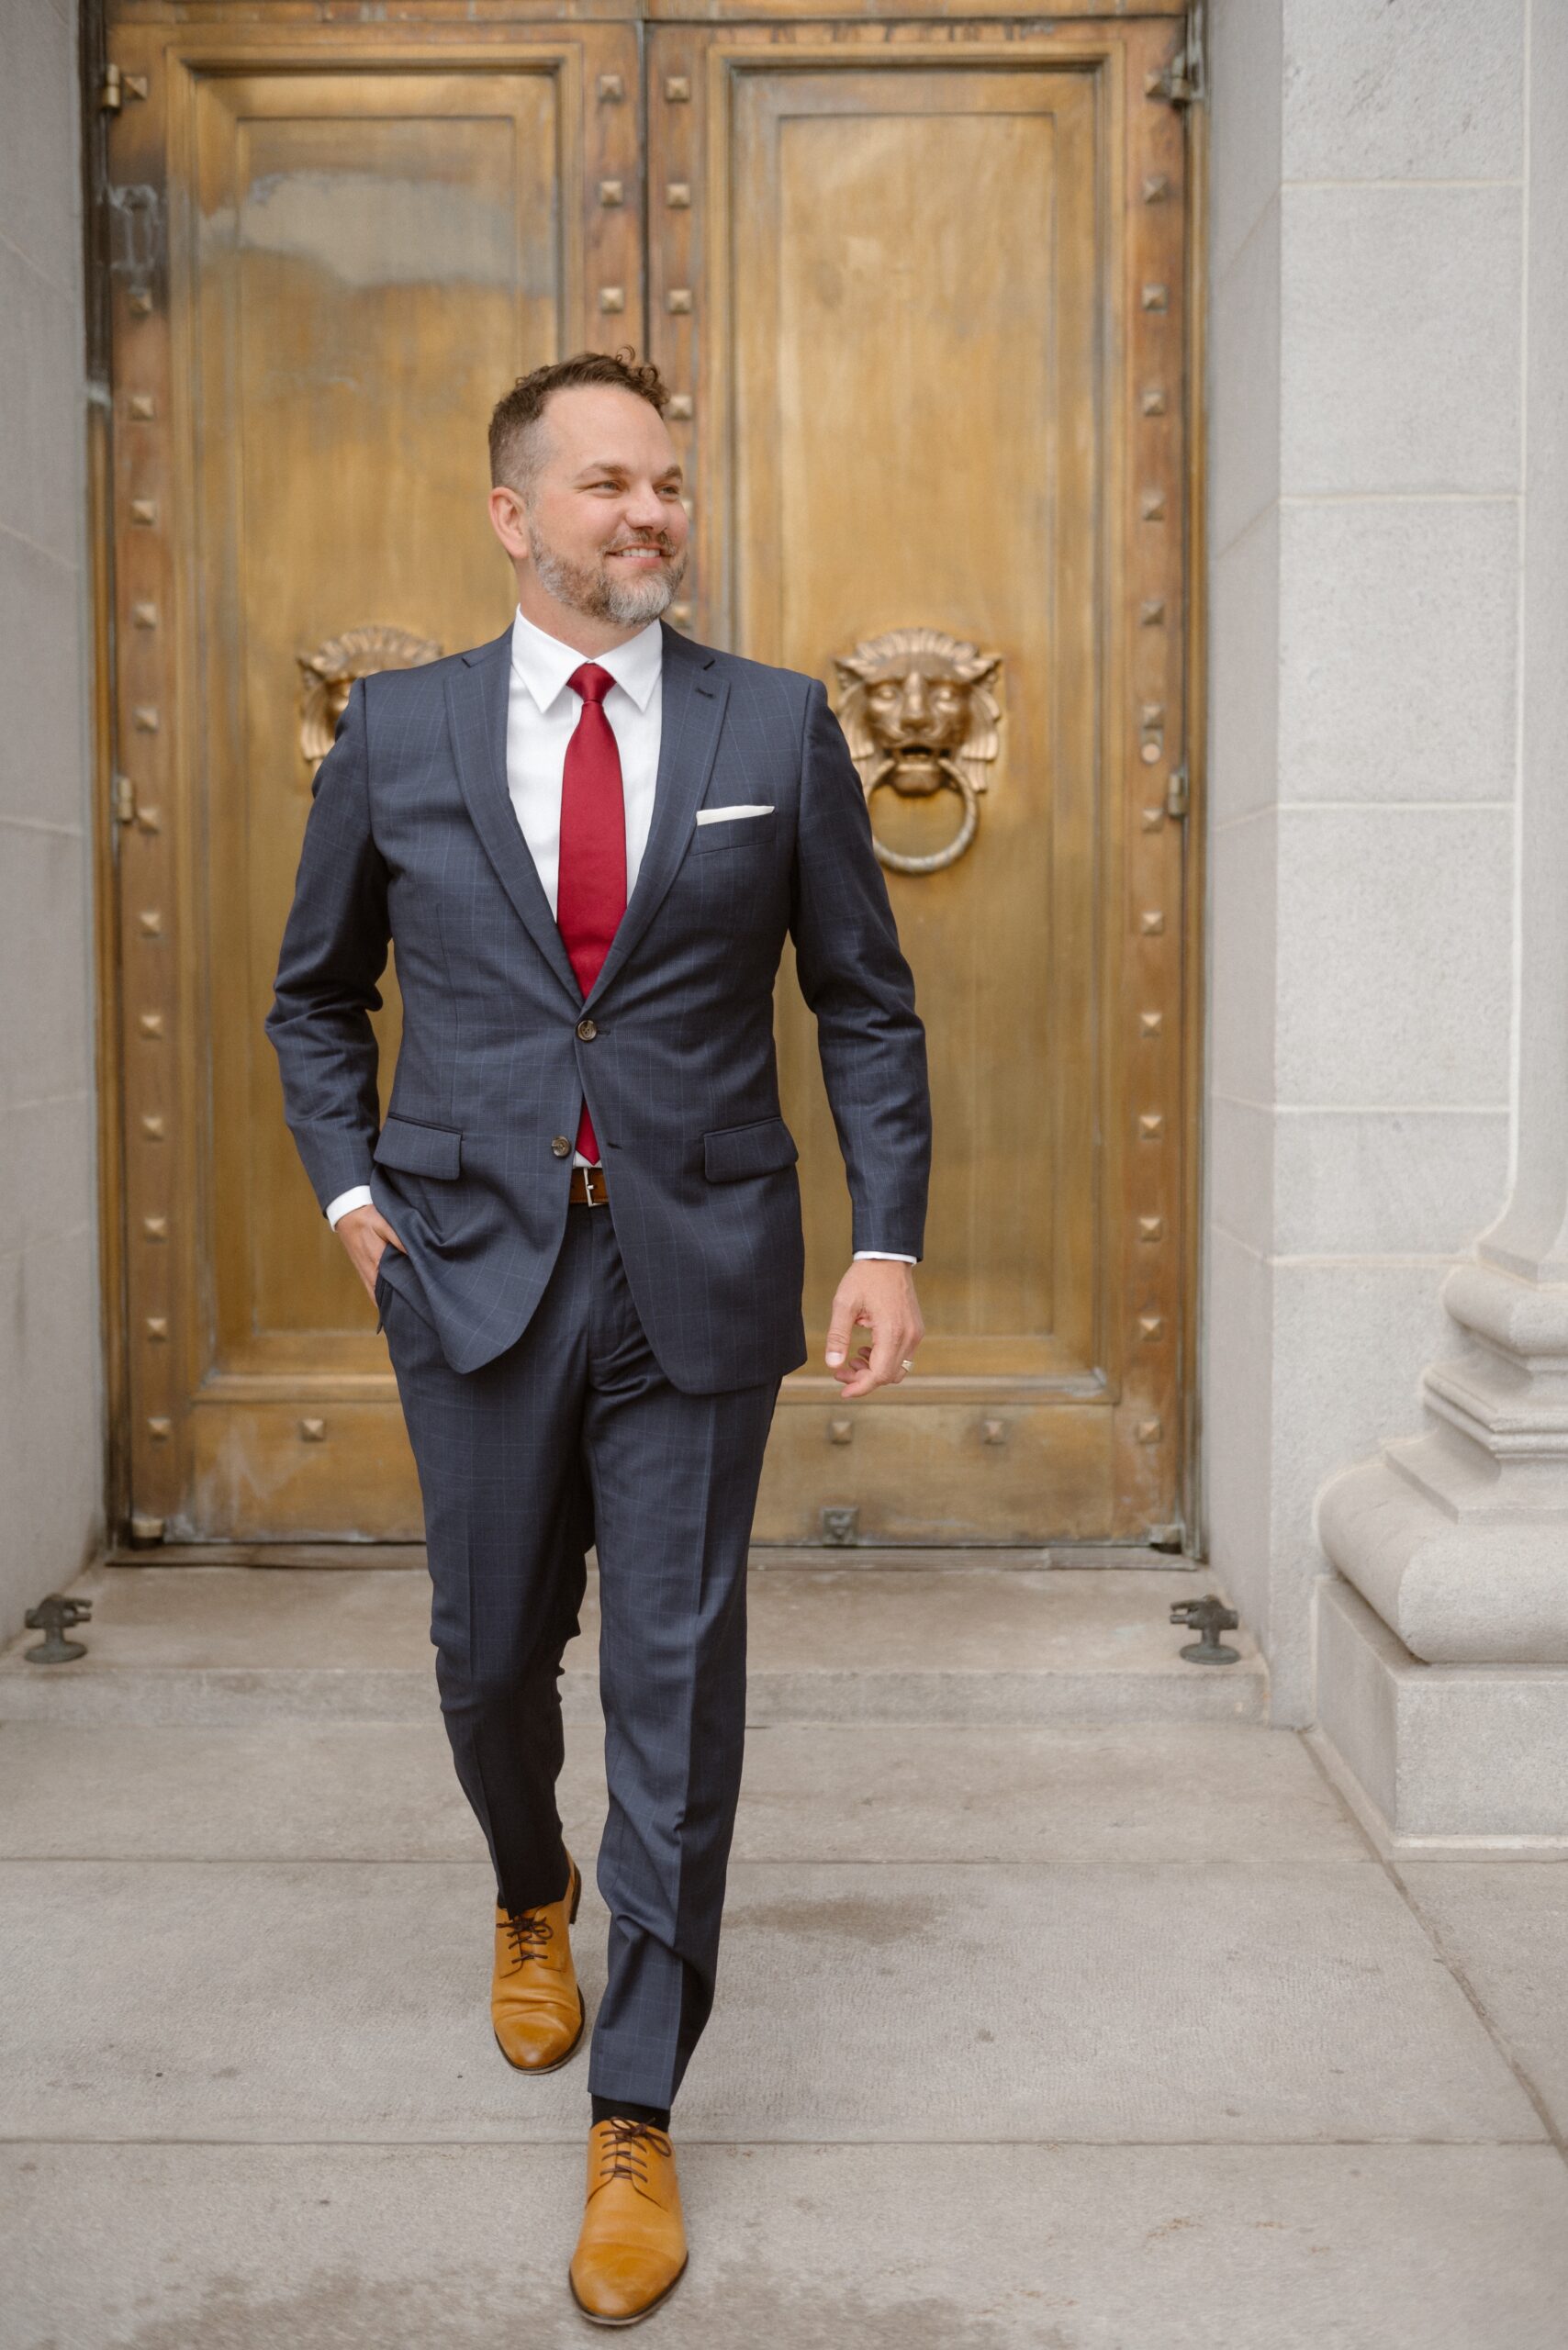 A groom poses in front of a golden door for his wedding portraits. Photo by Colorado wedding photographer Ashley Joyce.